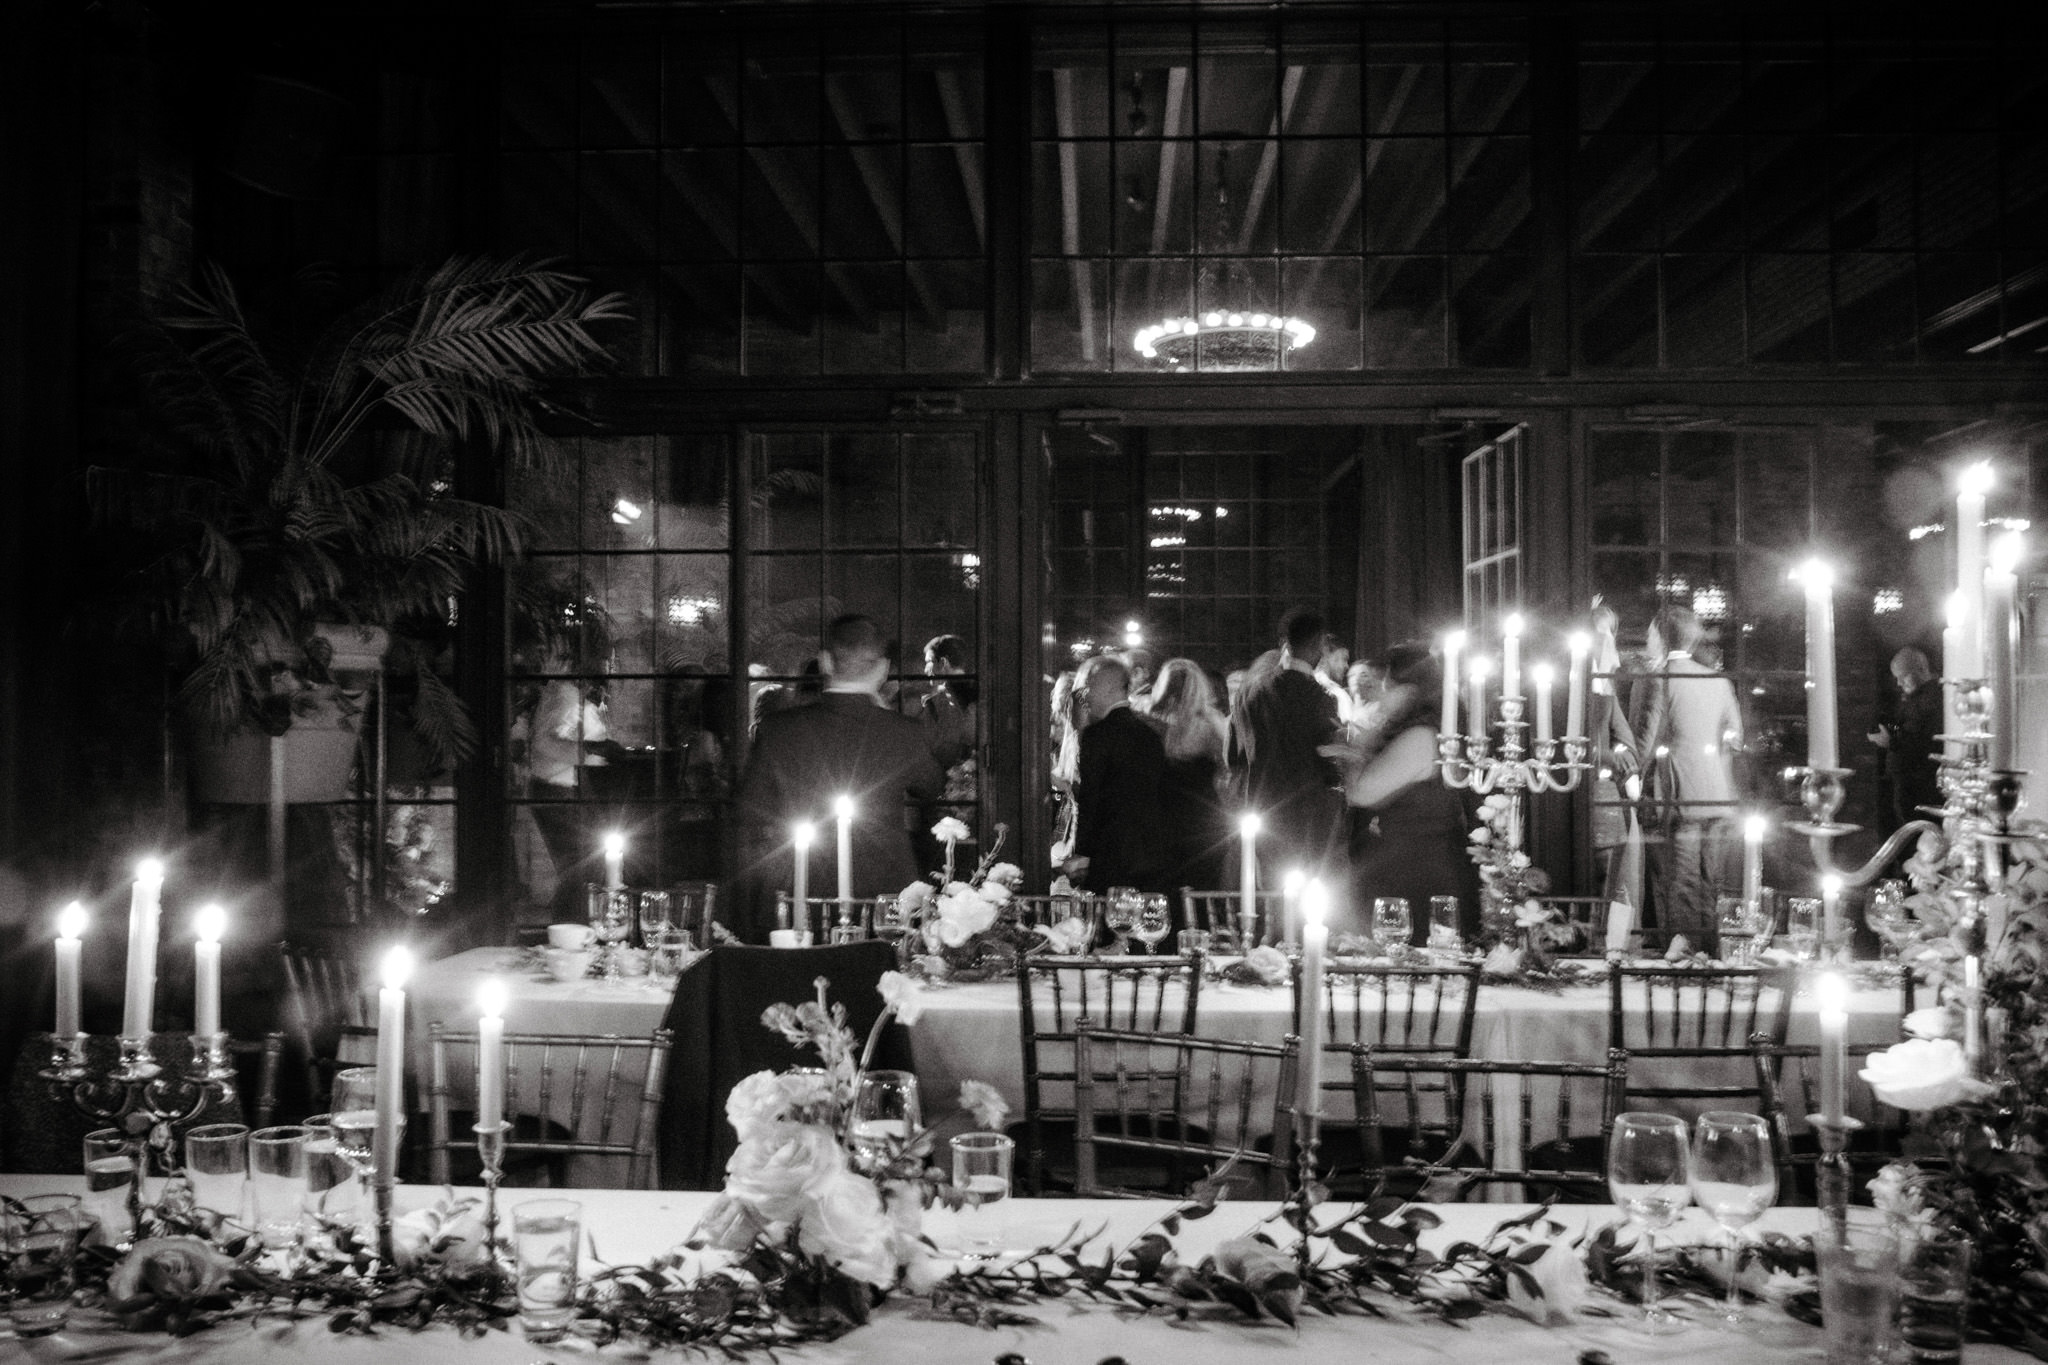 Black and white editorial photo of a wedding reception party. Wedding photography add-ons image by Jenny Fu Studio